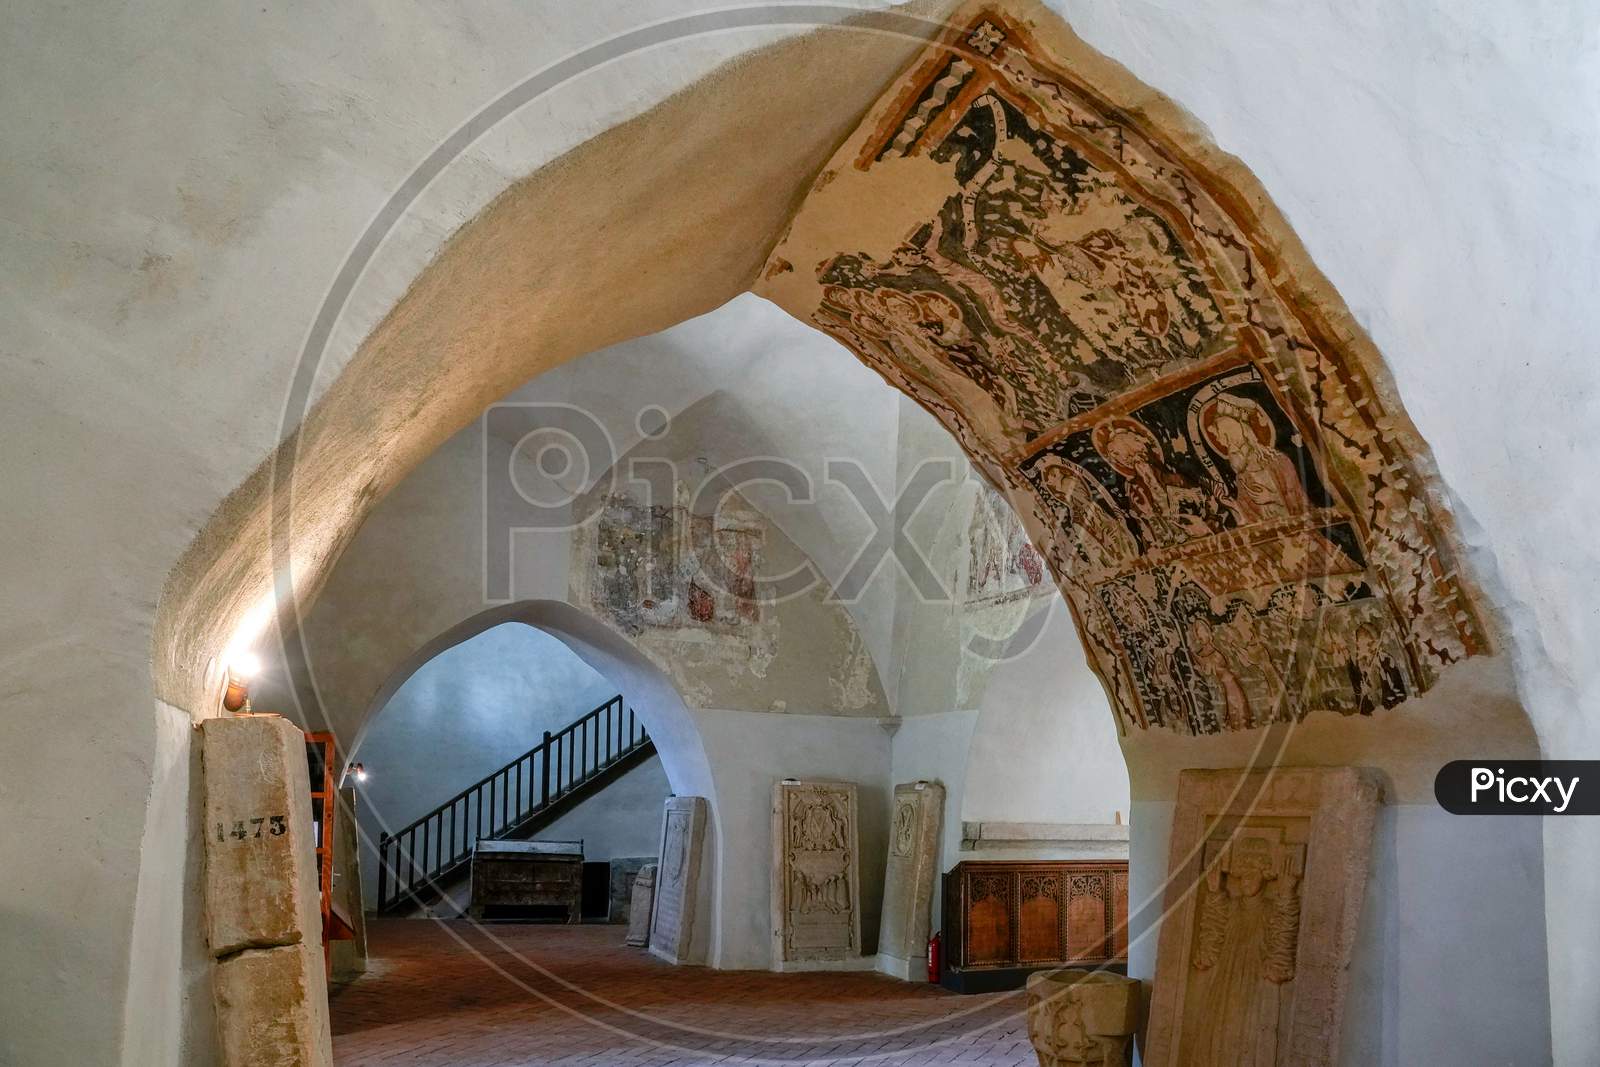 Sighisoara, Transylvania/Romania - September 17 : Interior View Of The Church On The Hill In Sighisoara Transylvania Romania On September 17, 2018